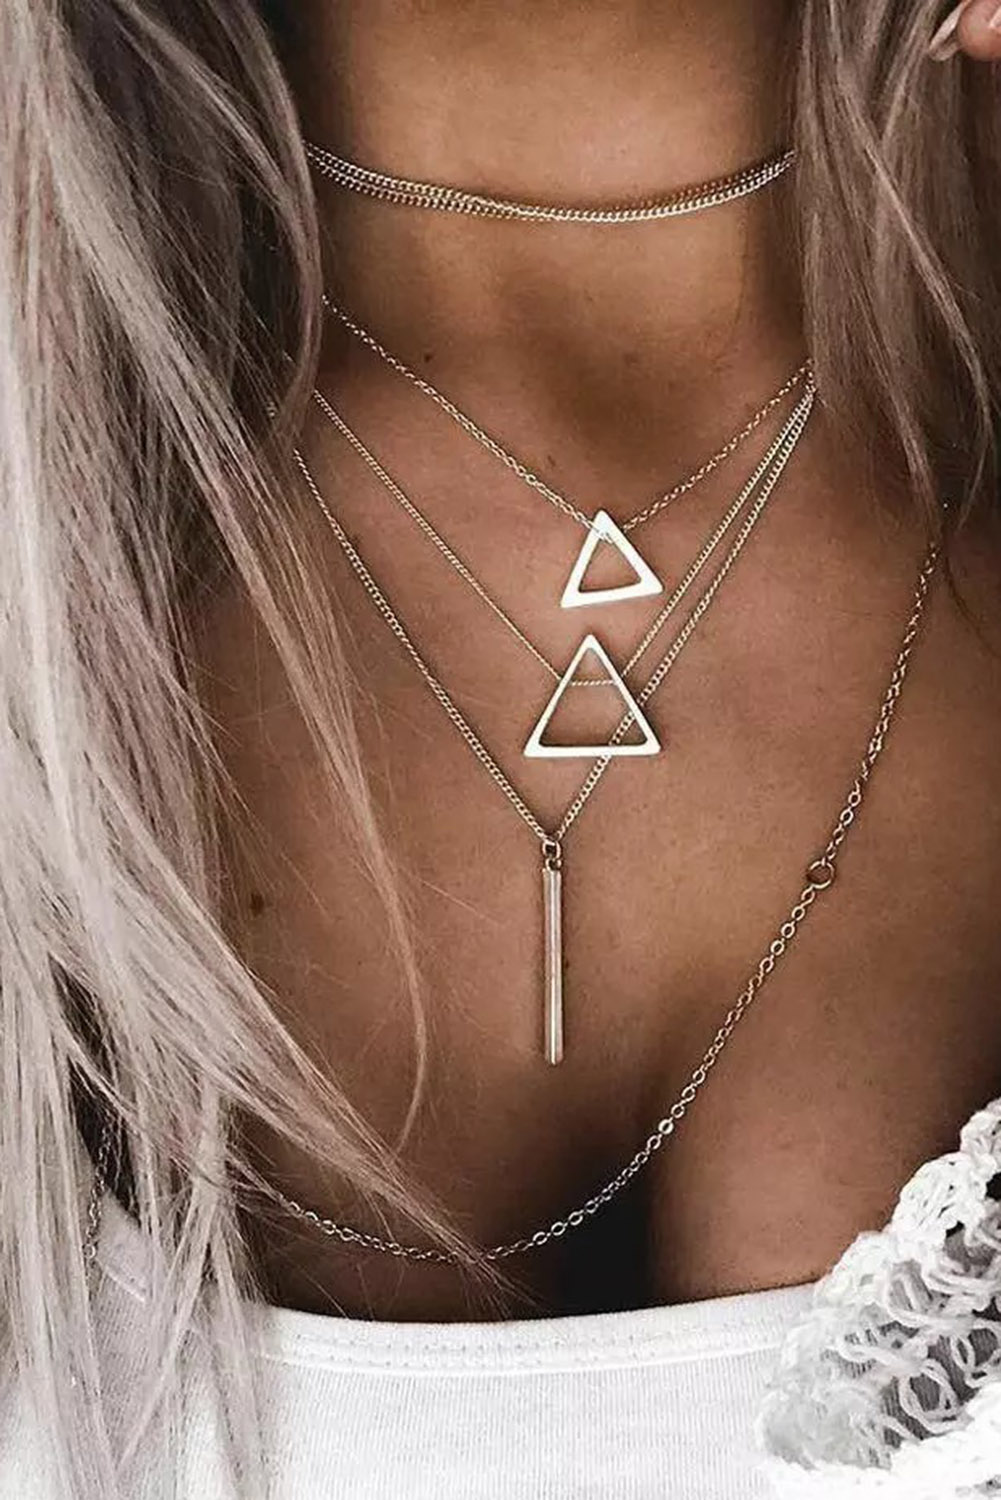 Wholesale Silver Triangle PENDANT Chain Multilayer Necklace 